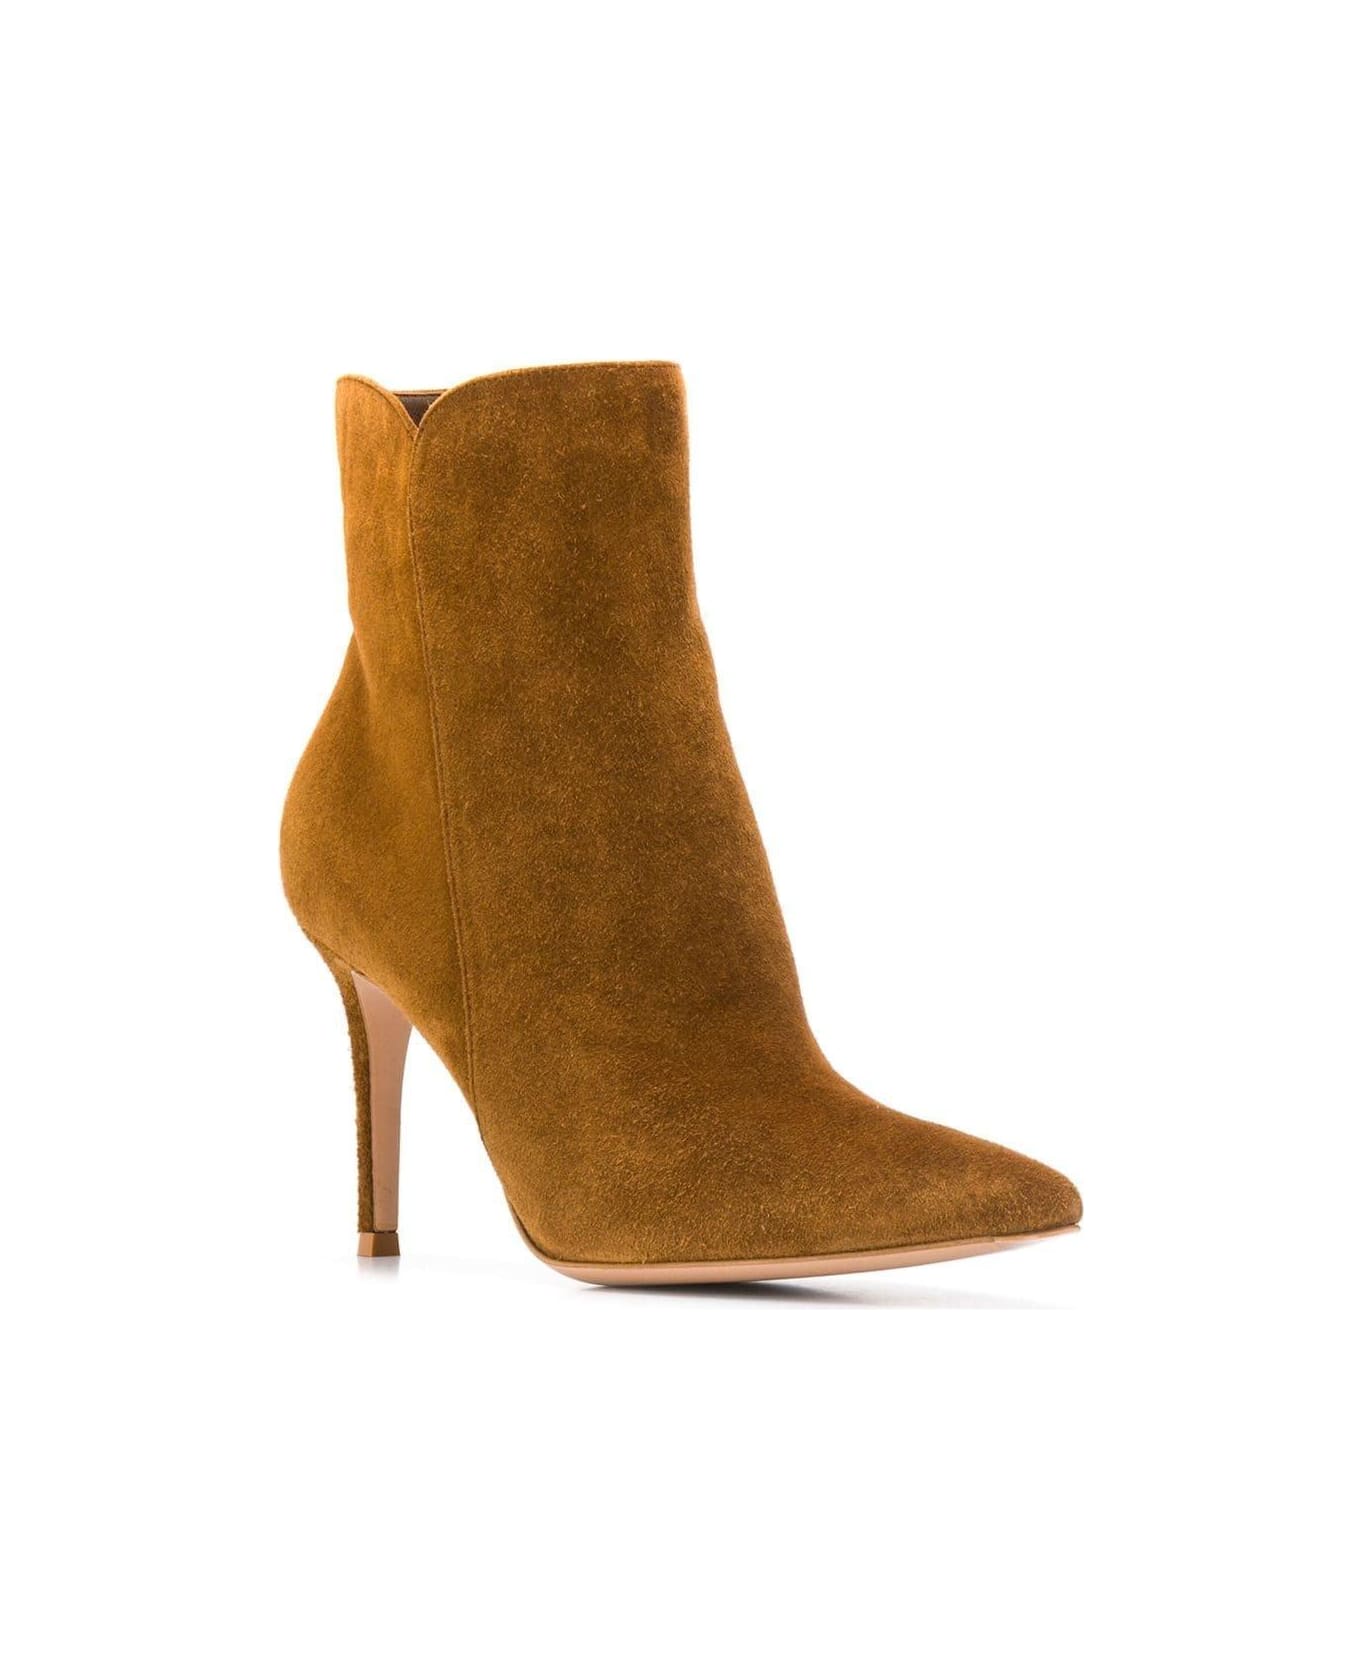 Gianvito Rossi Levy Ankle Boots